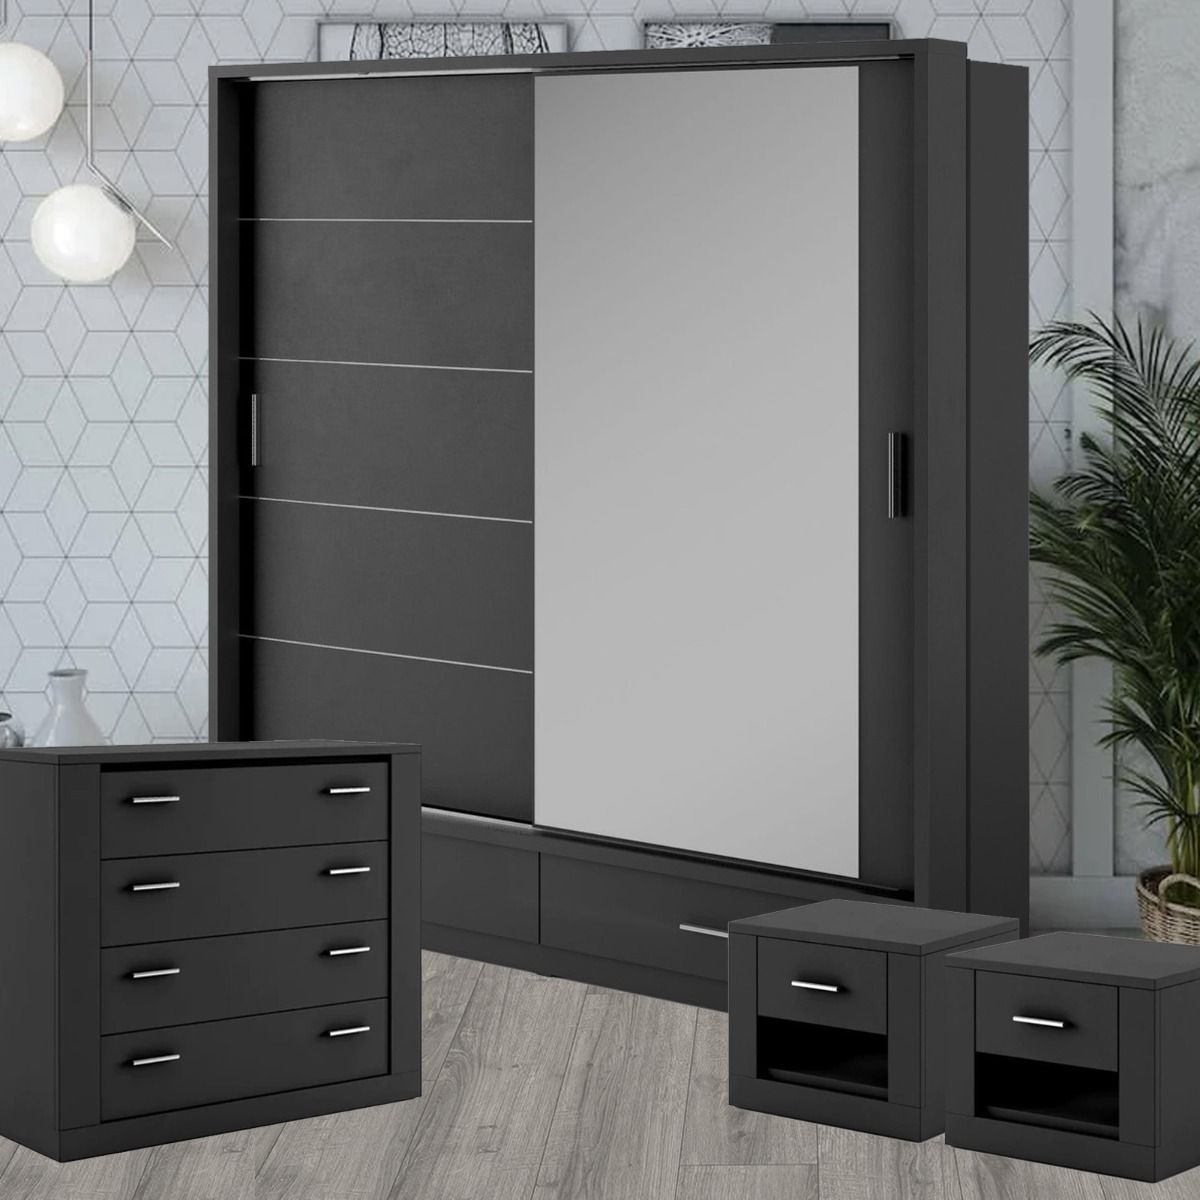 Bedroom Furniture Sets On Sale | Wardrobe Direct™ Regarding Wardrobes And Chest Of Drawers Combined (View 14 of 15)